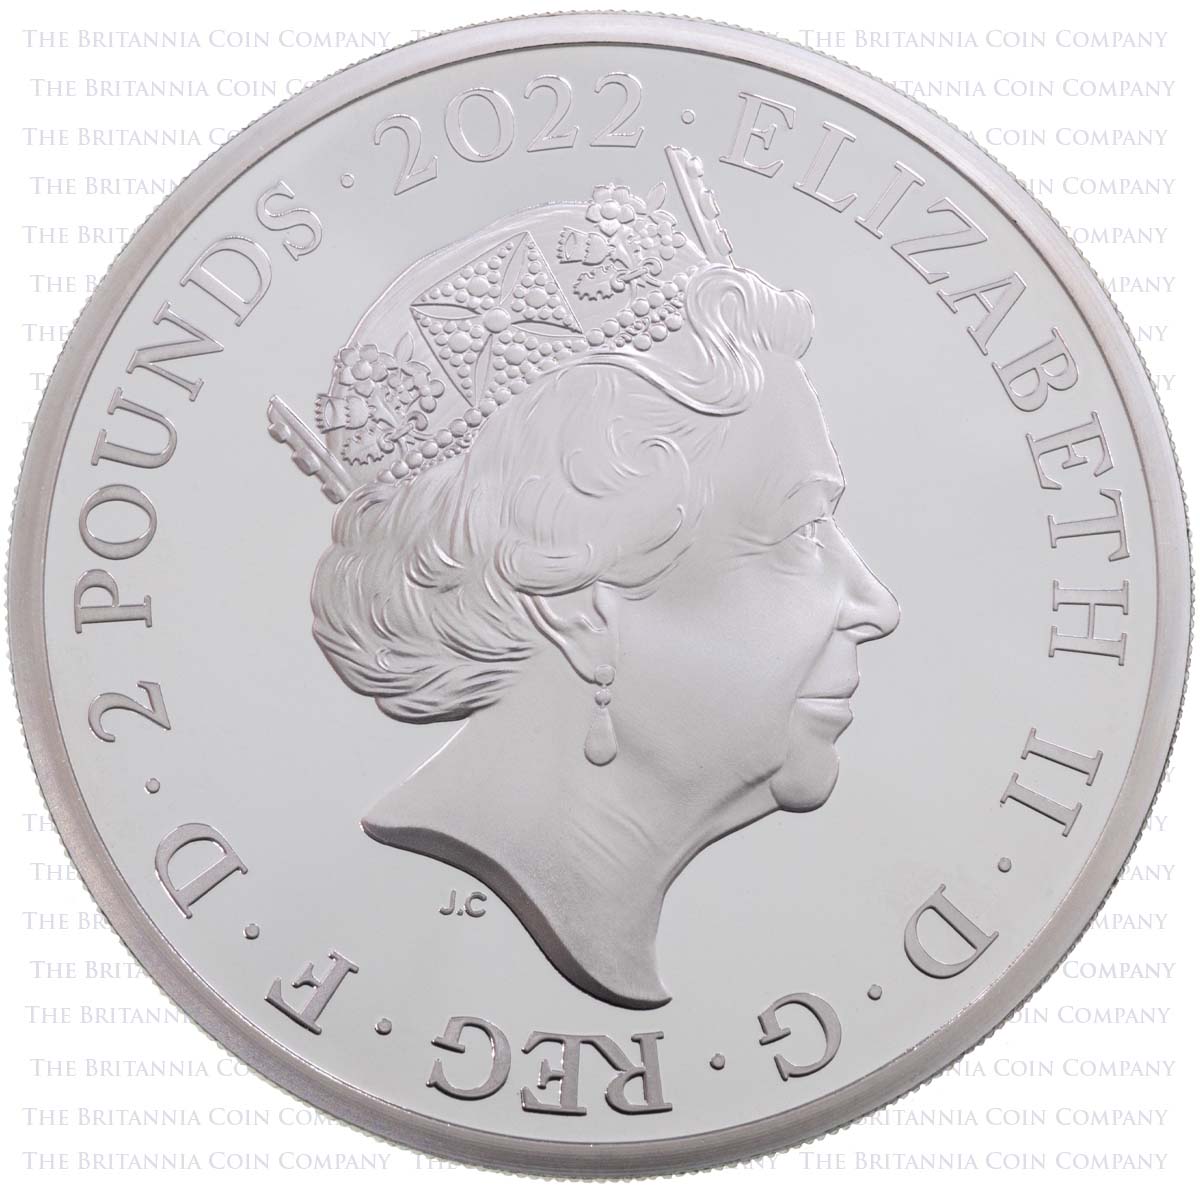 UK22E7S1O 2022 British Monarchs King Edward VII One Ounce Silver Proof Coin Obverse